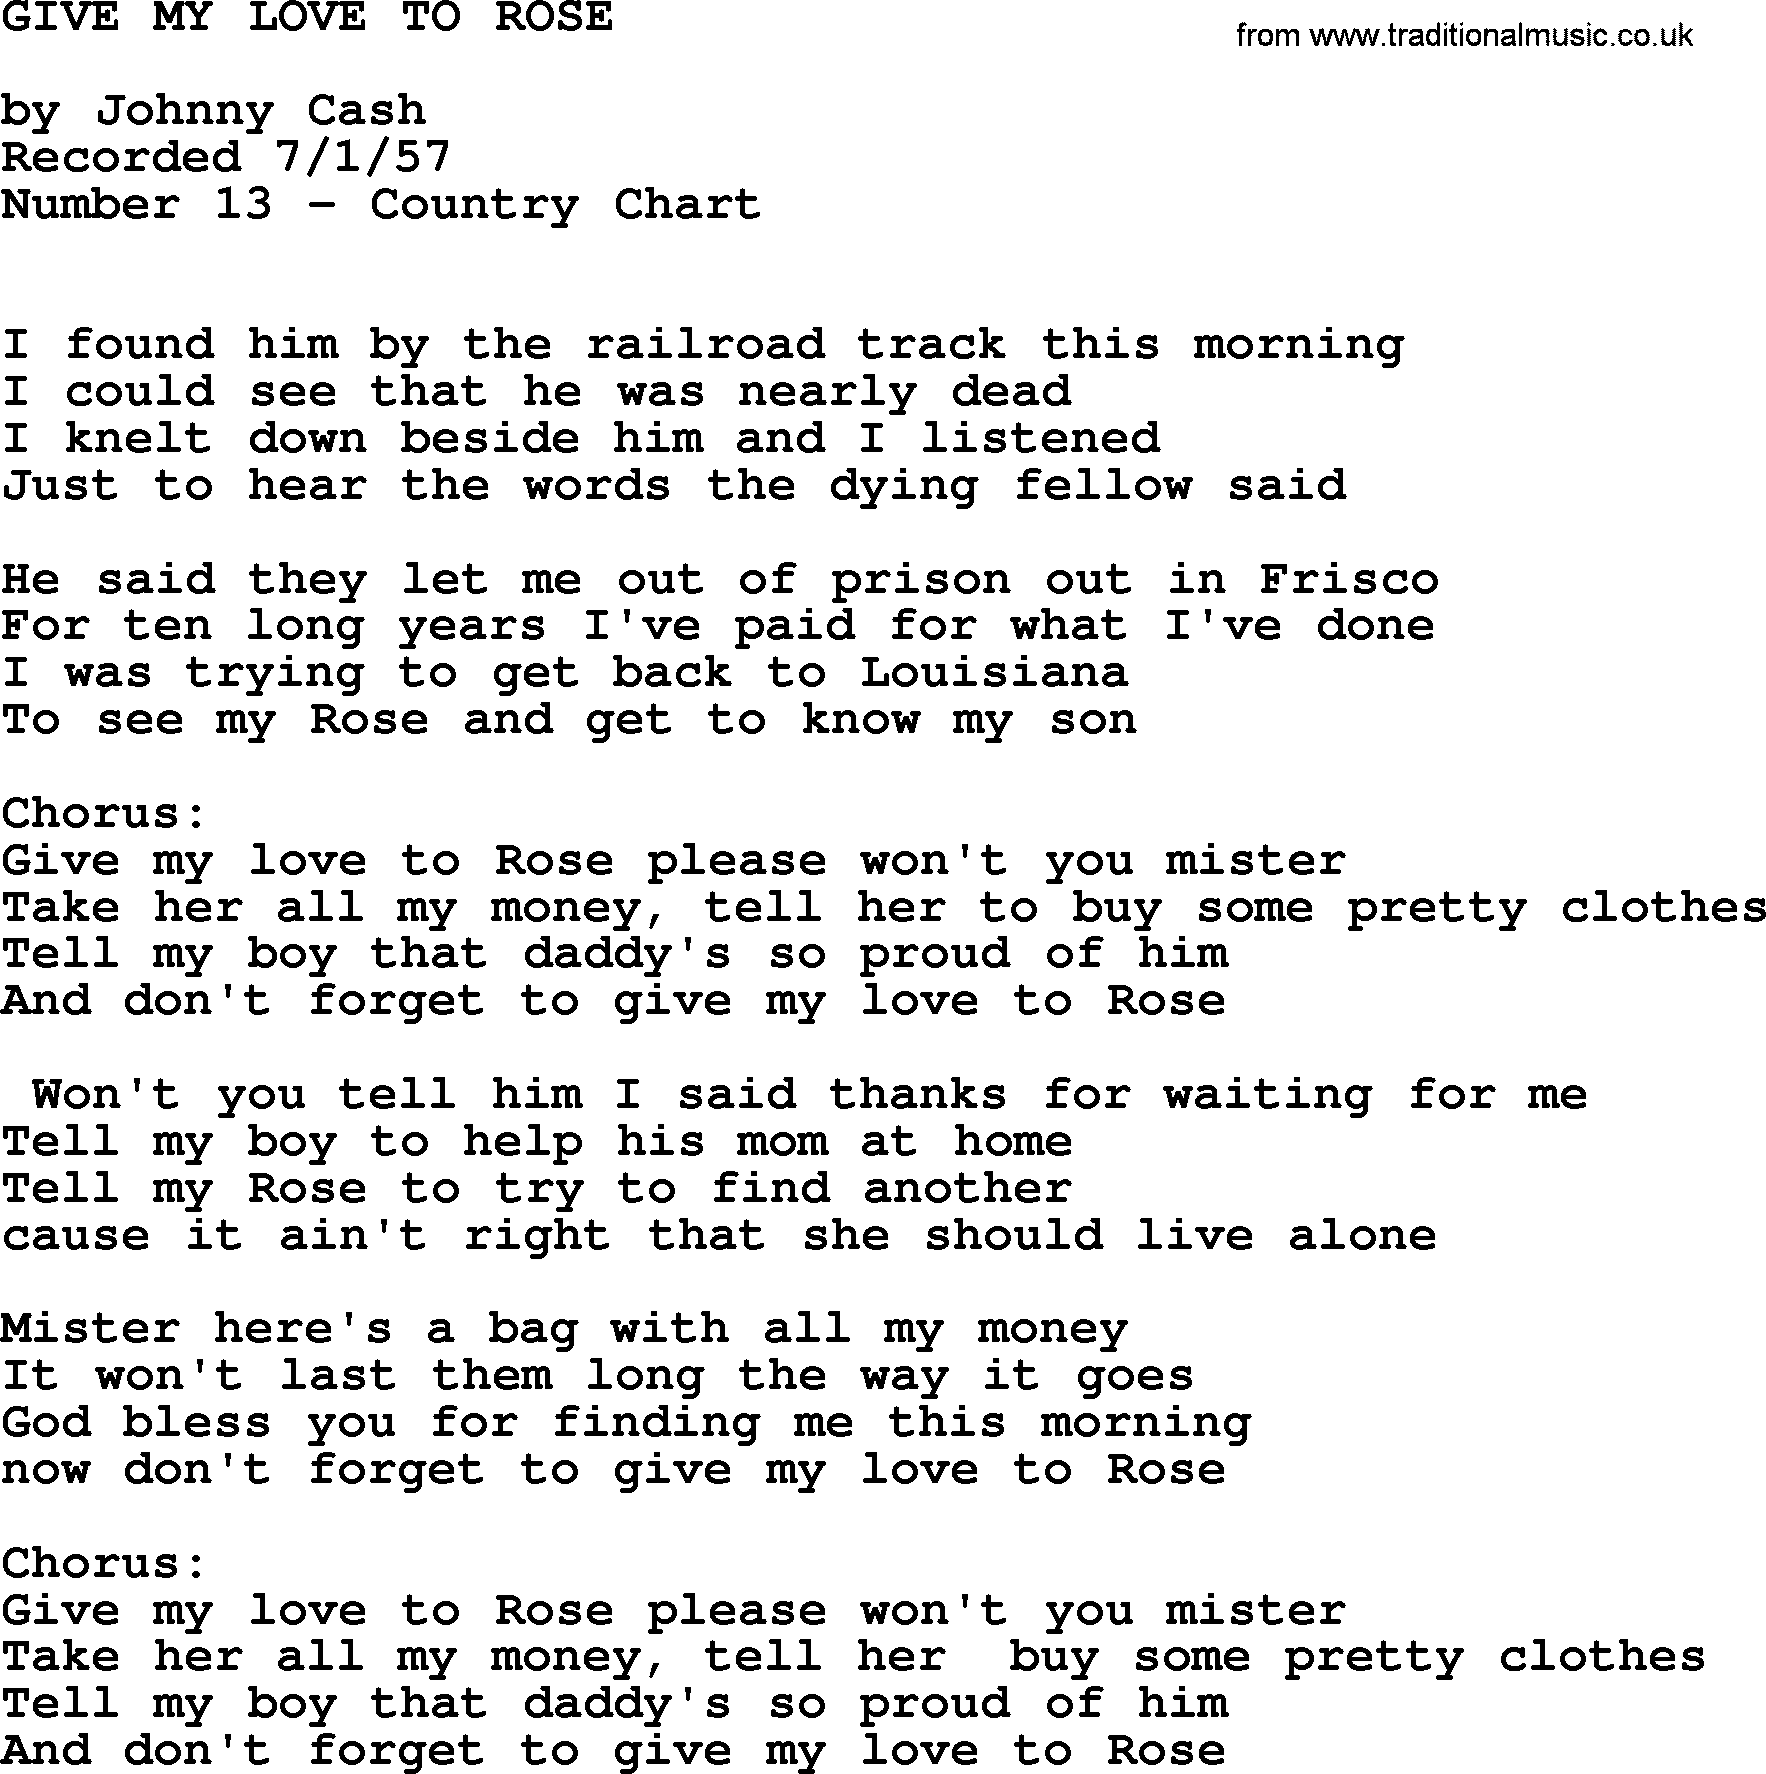 Johnny Cash song Give My Love To Rose.txt lyrics